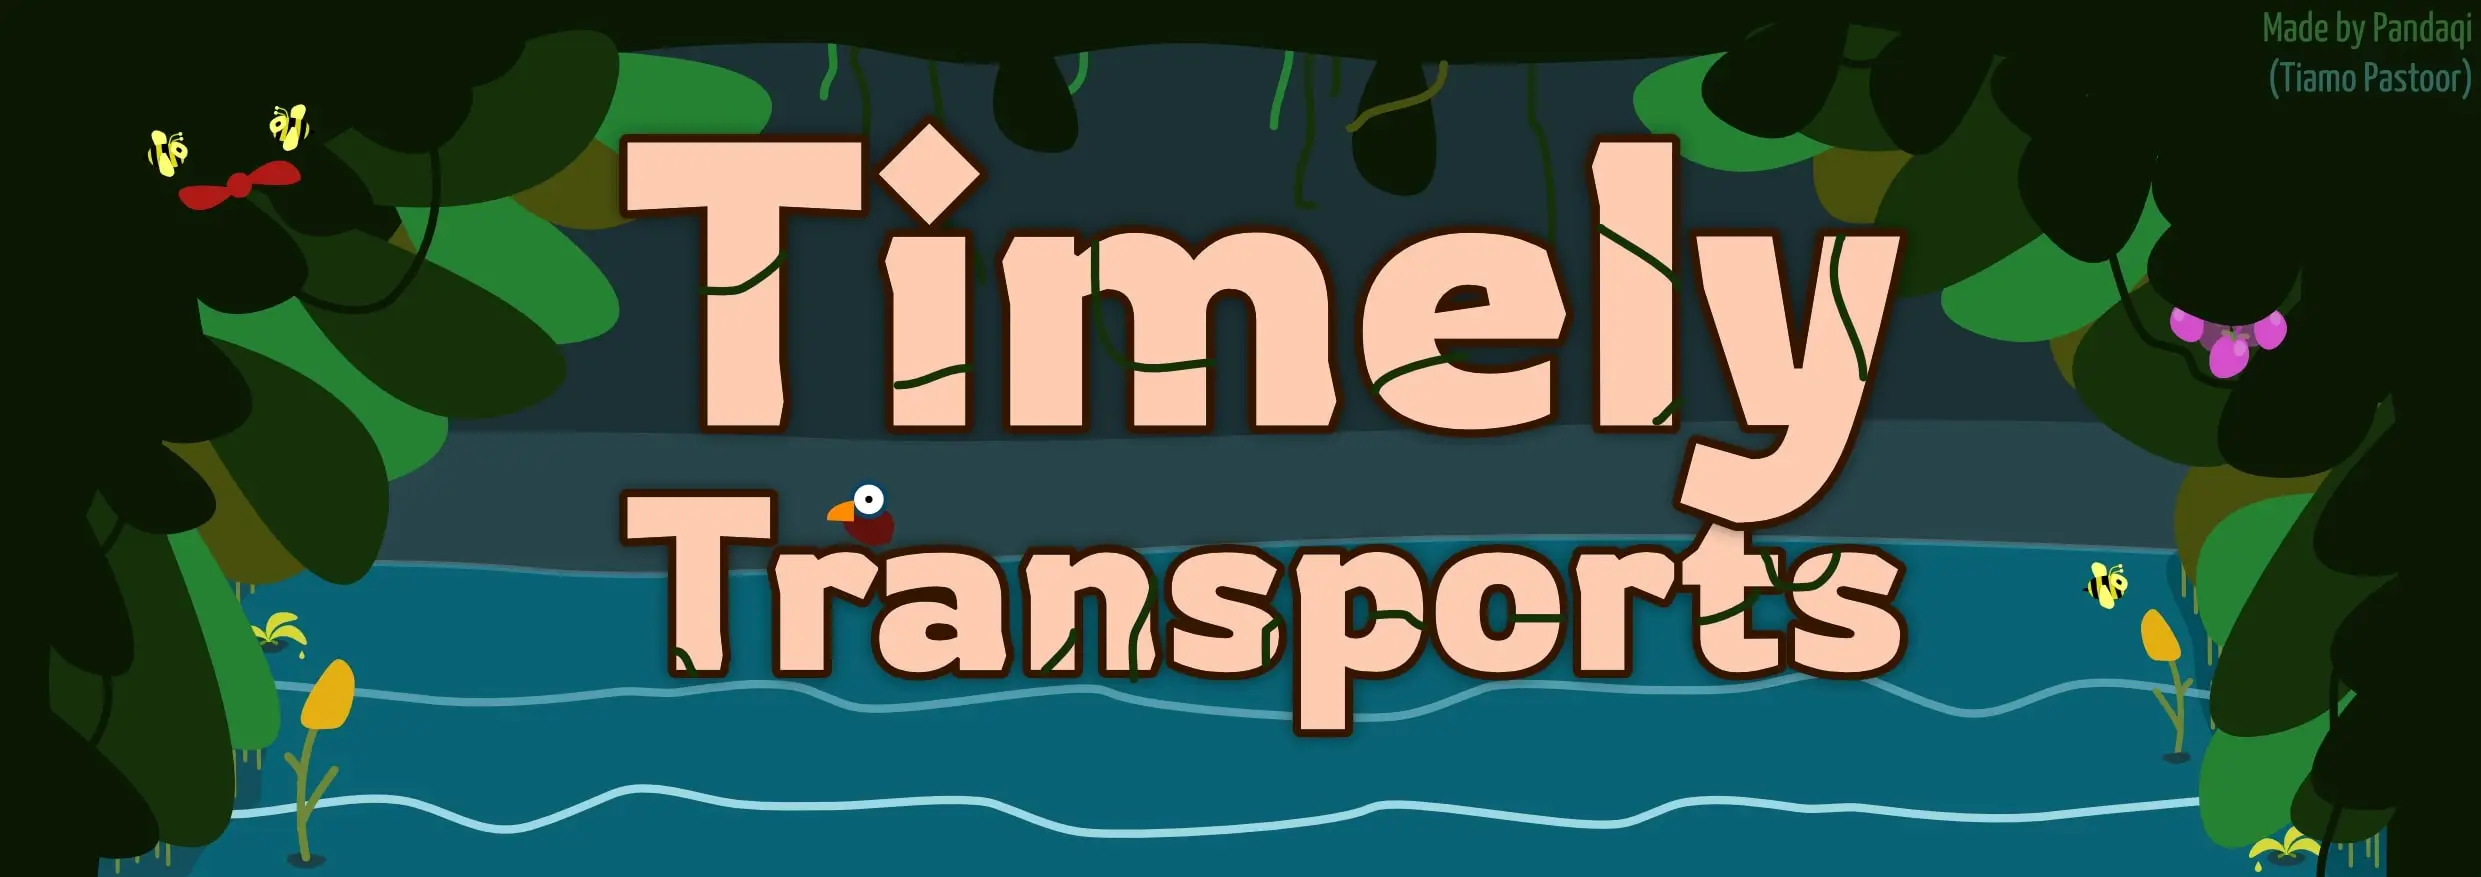 Thumbnail / Header for article: Timely Transports